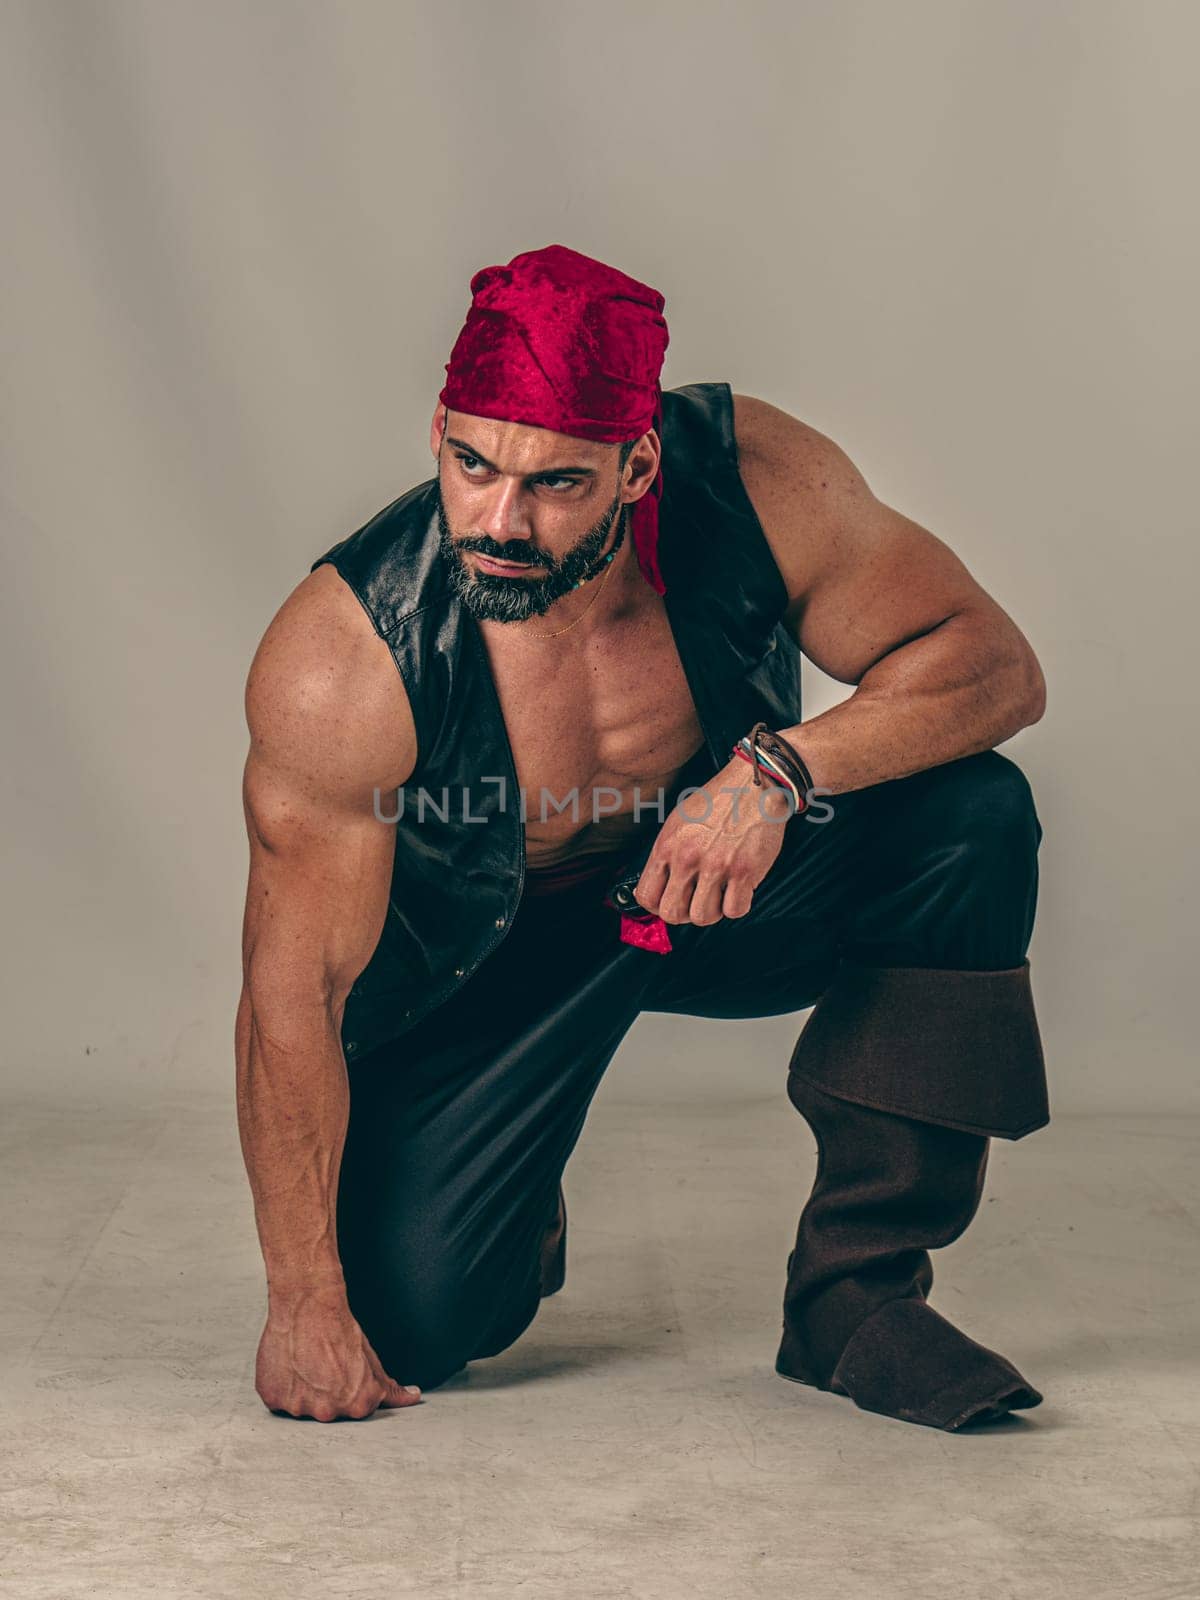 A Brave Soul in Crimson: A Male Bodybuilder with a Red Bandanna Standing Proudly Before a Clean Canvas by artofphoto